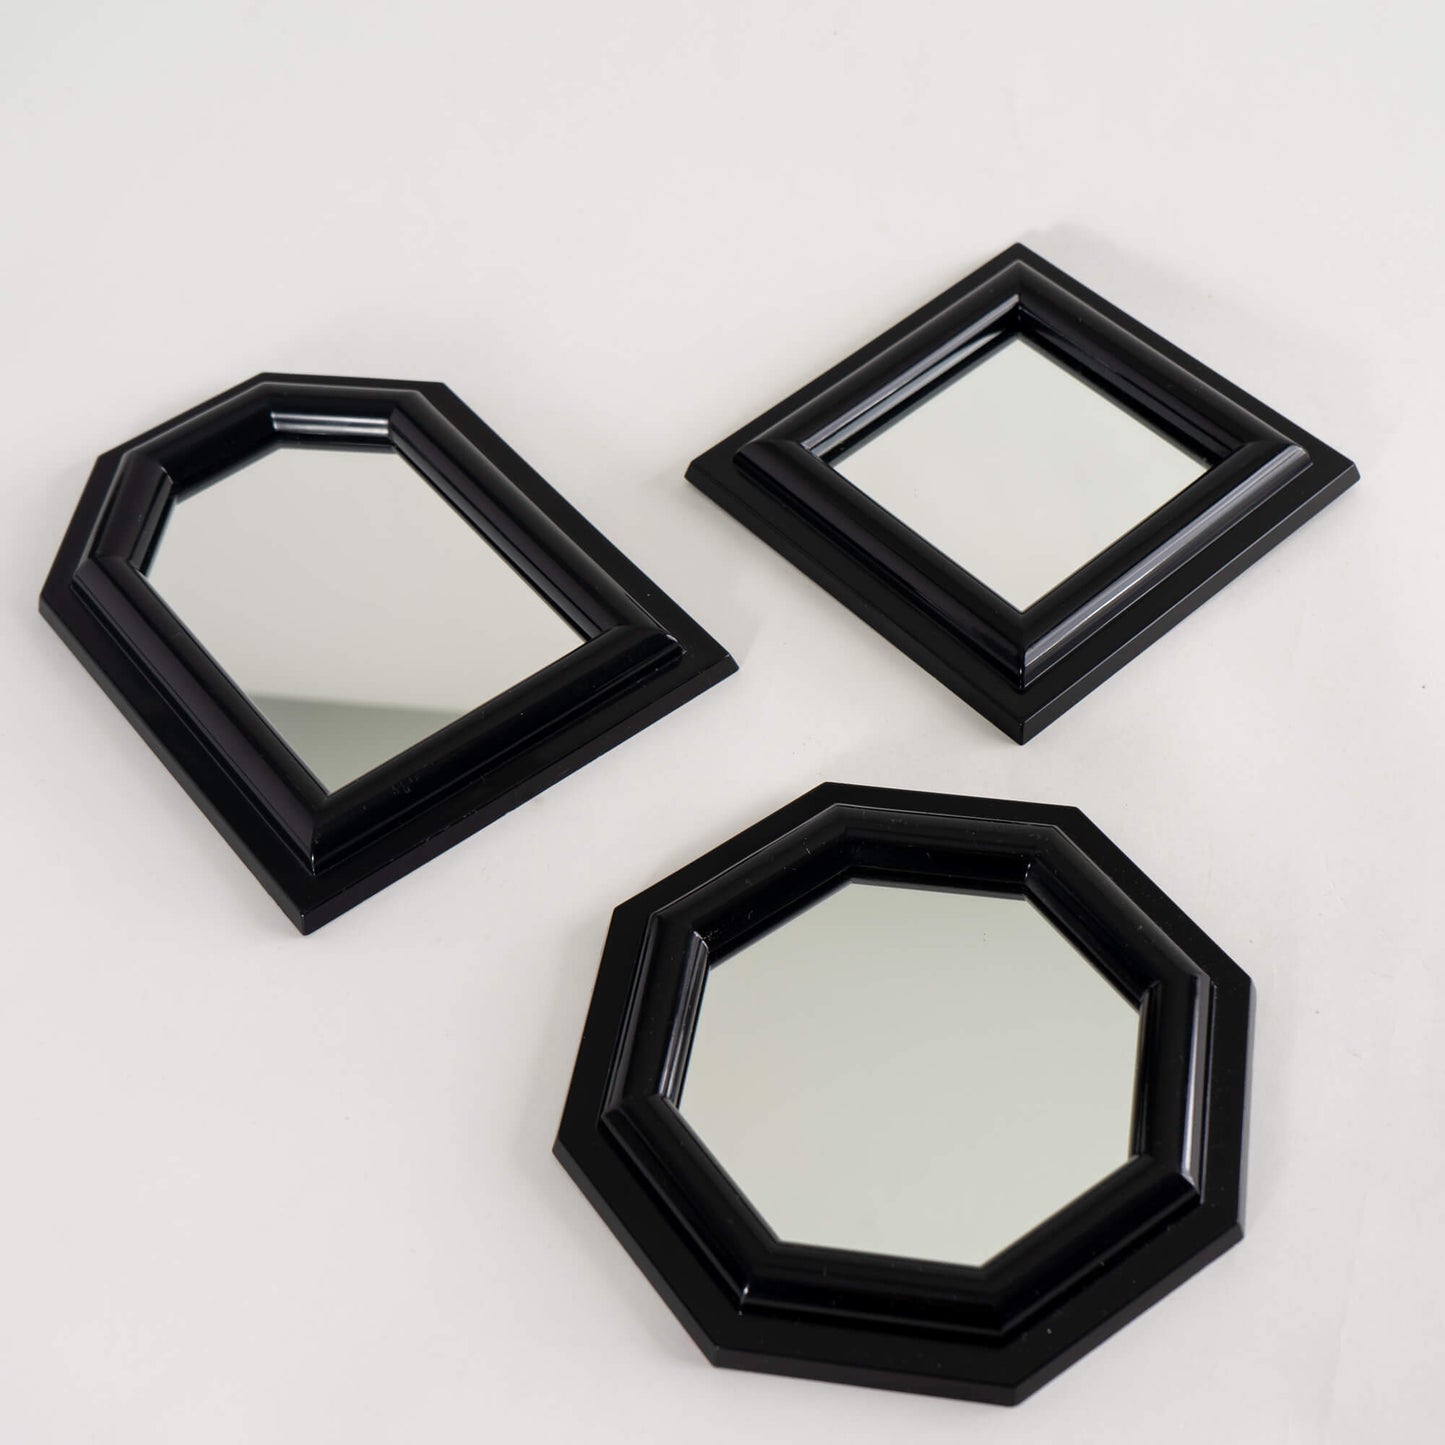 Load image into Gallery viewer, Vintage Black Wall Mirrors - Set of 3
